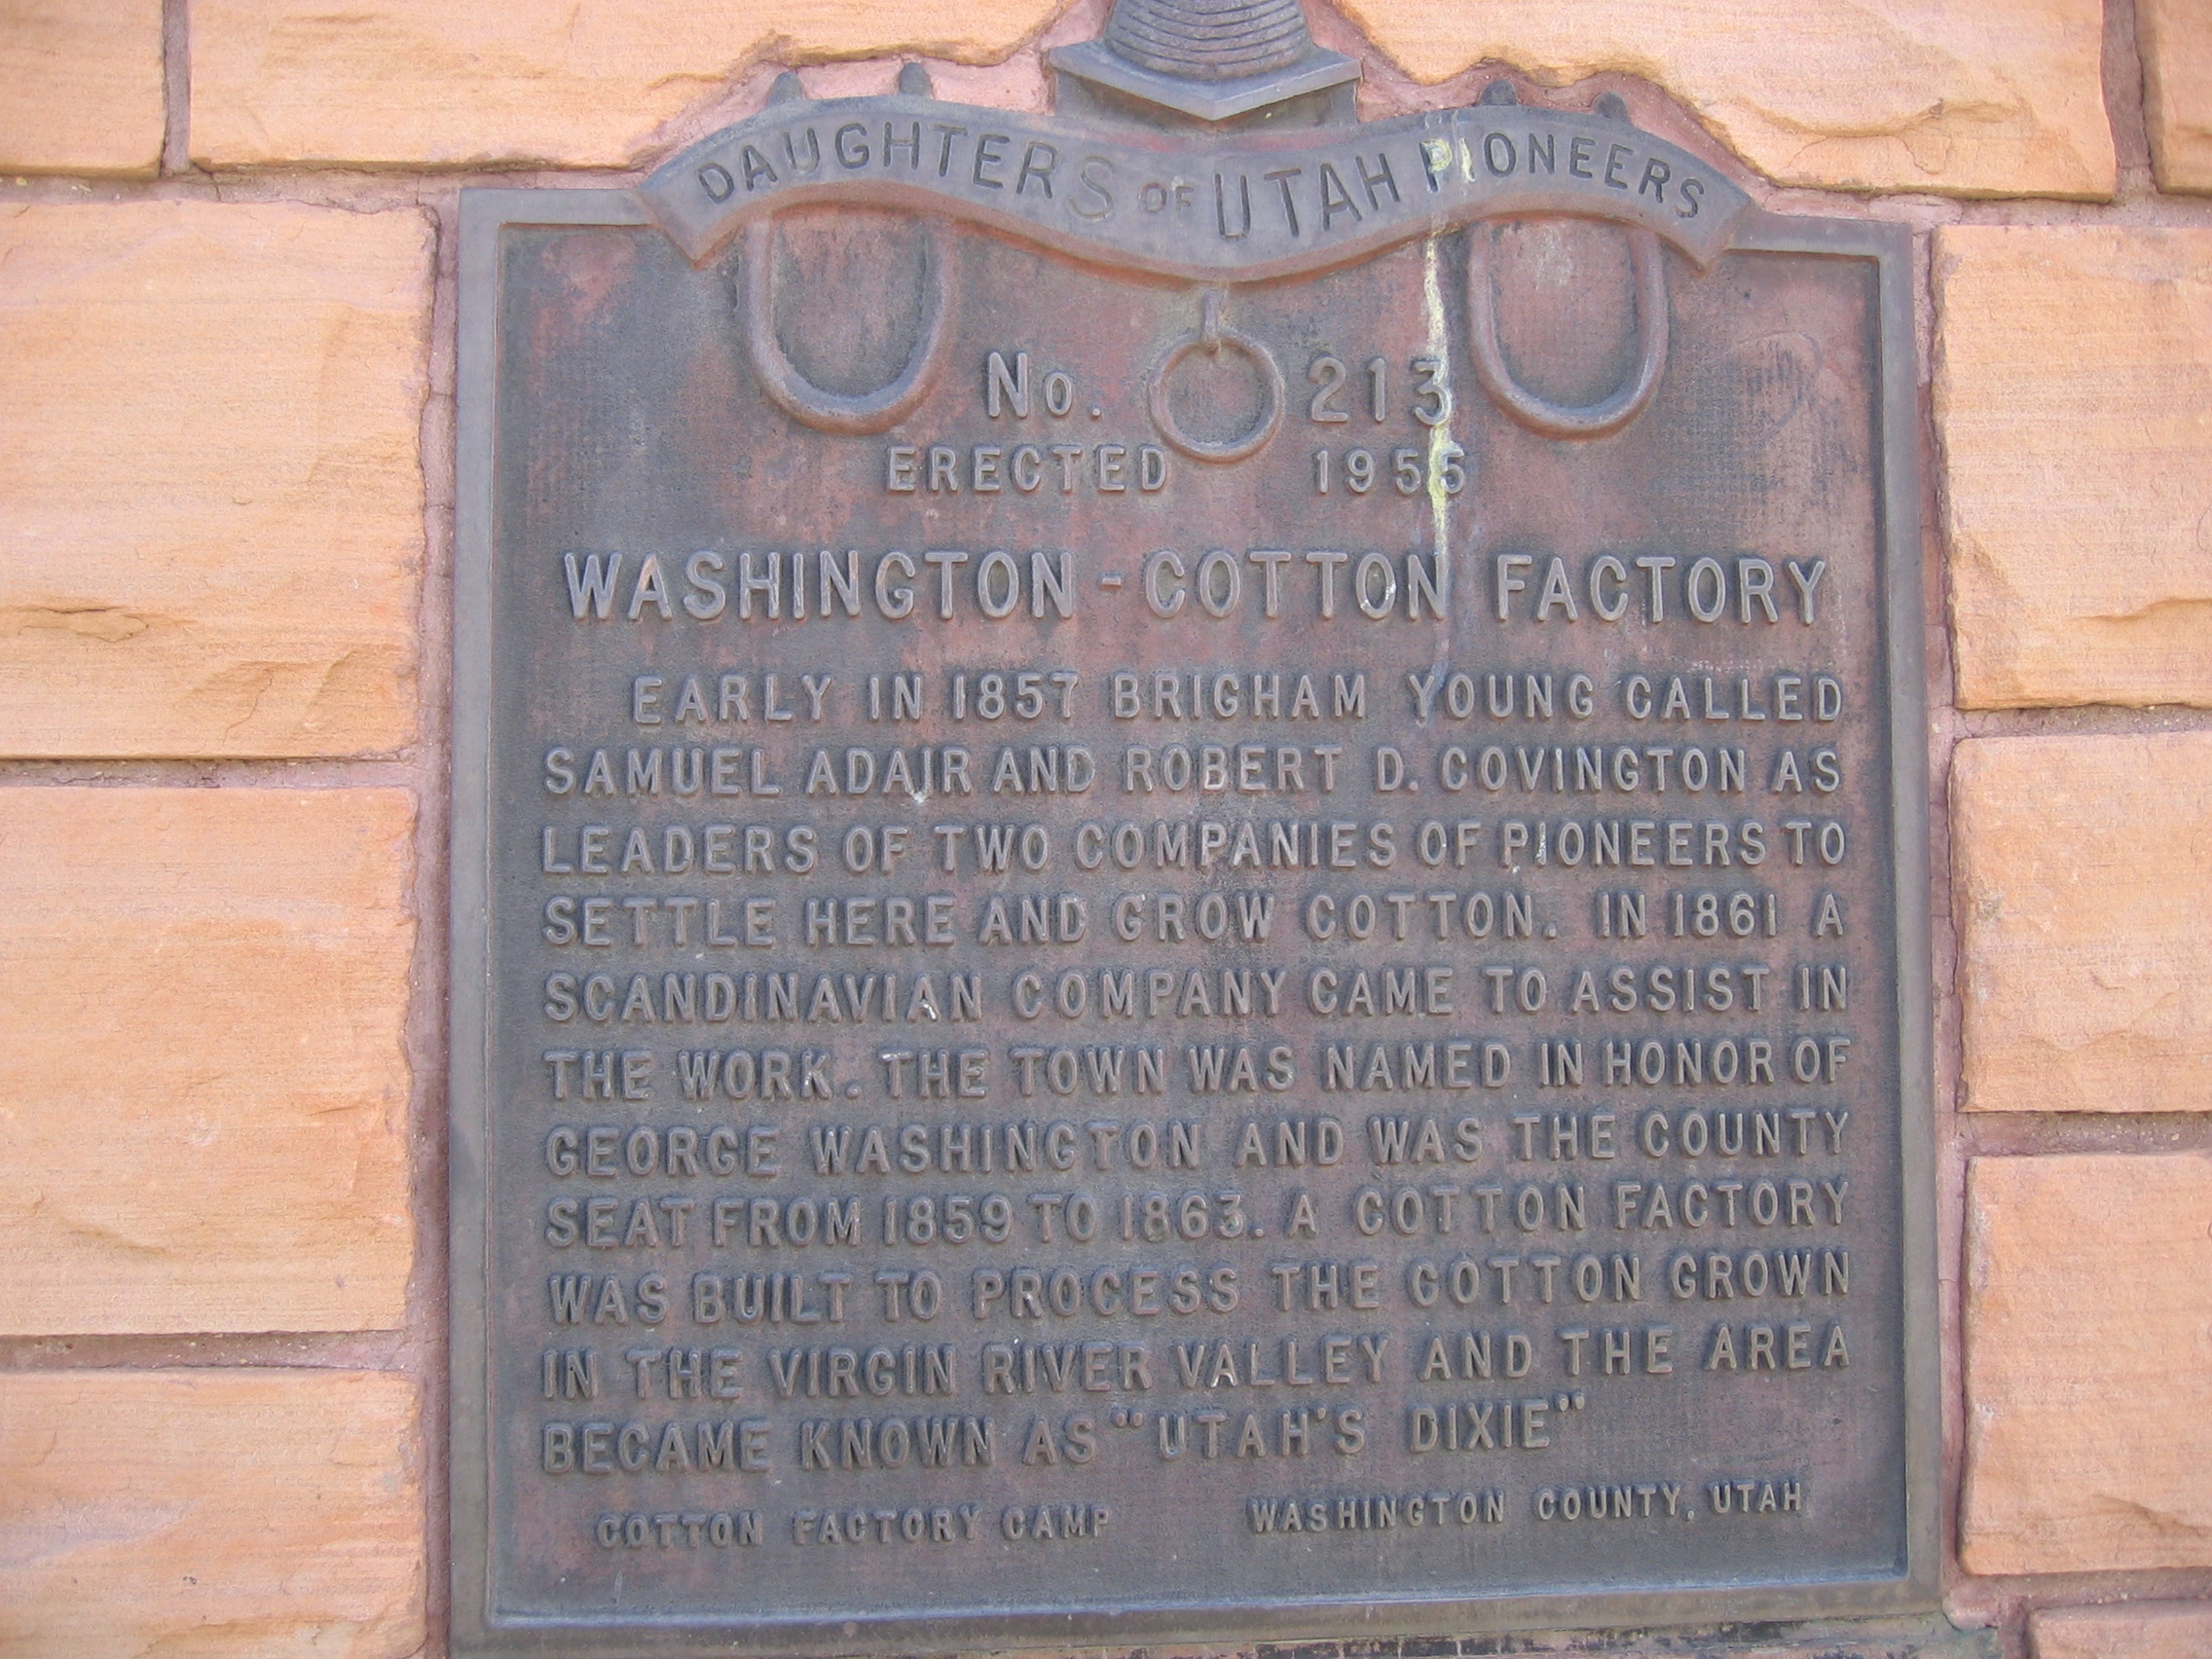 WCHS-00126 Plaque about the Cotton Factory in Washington